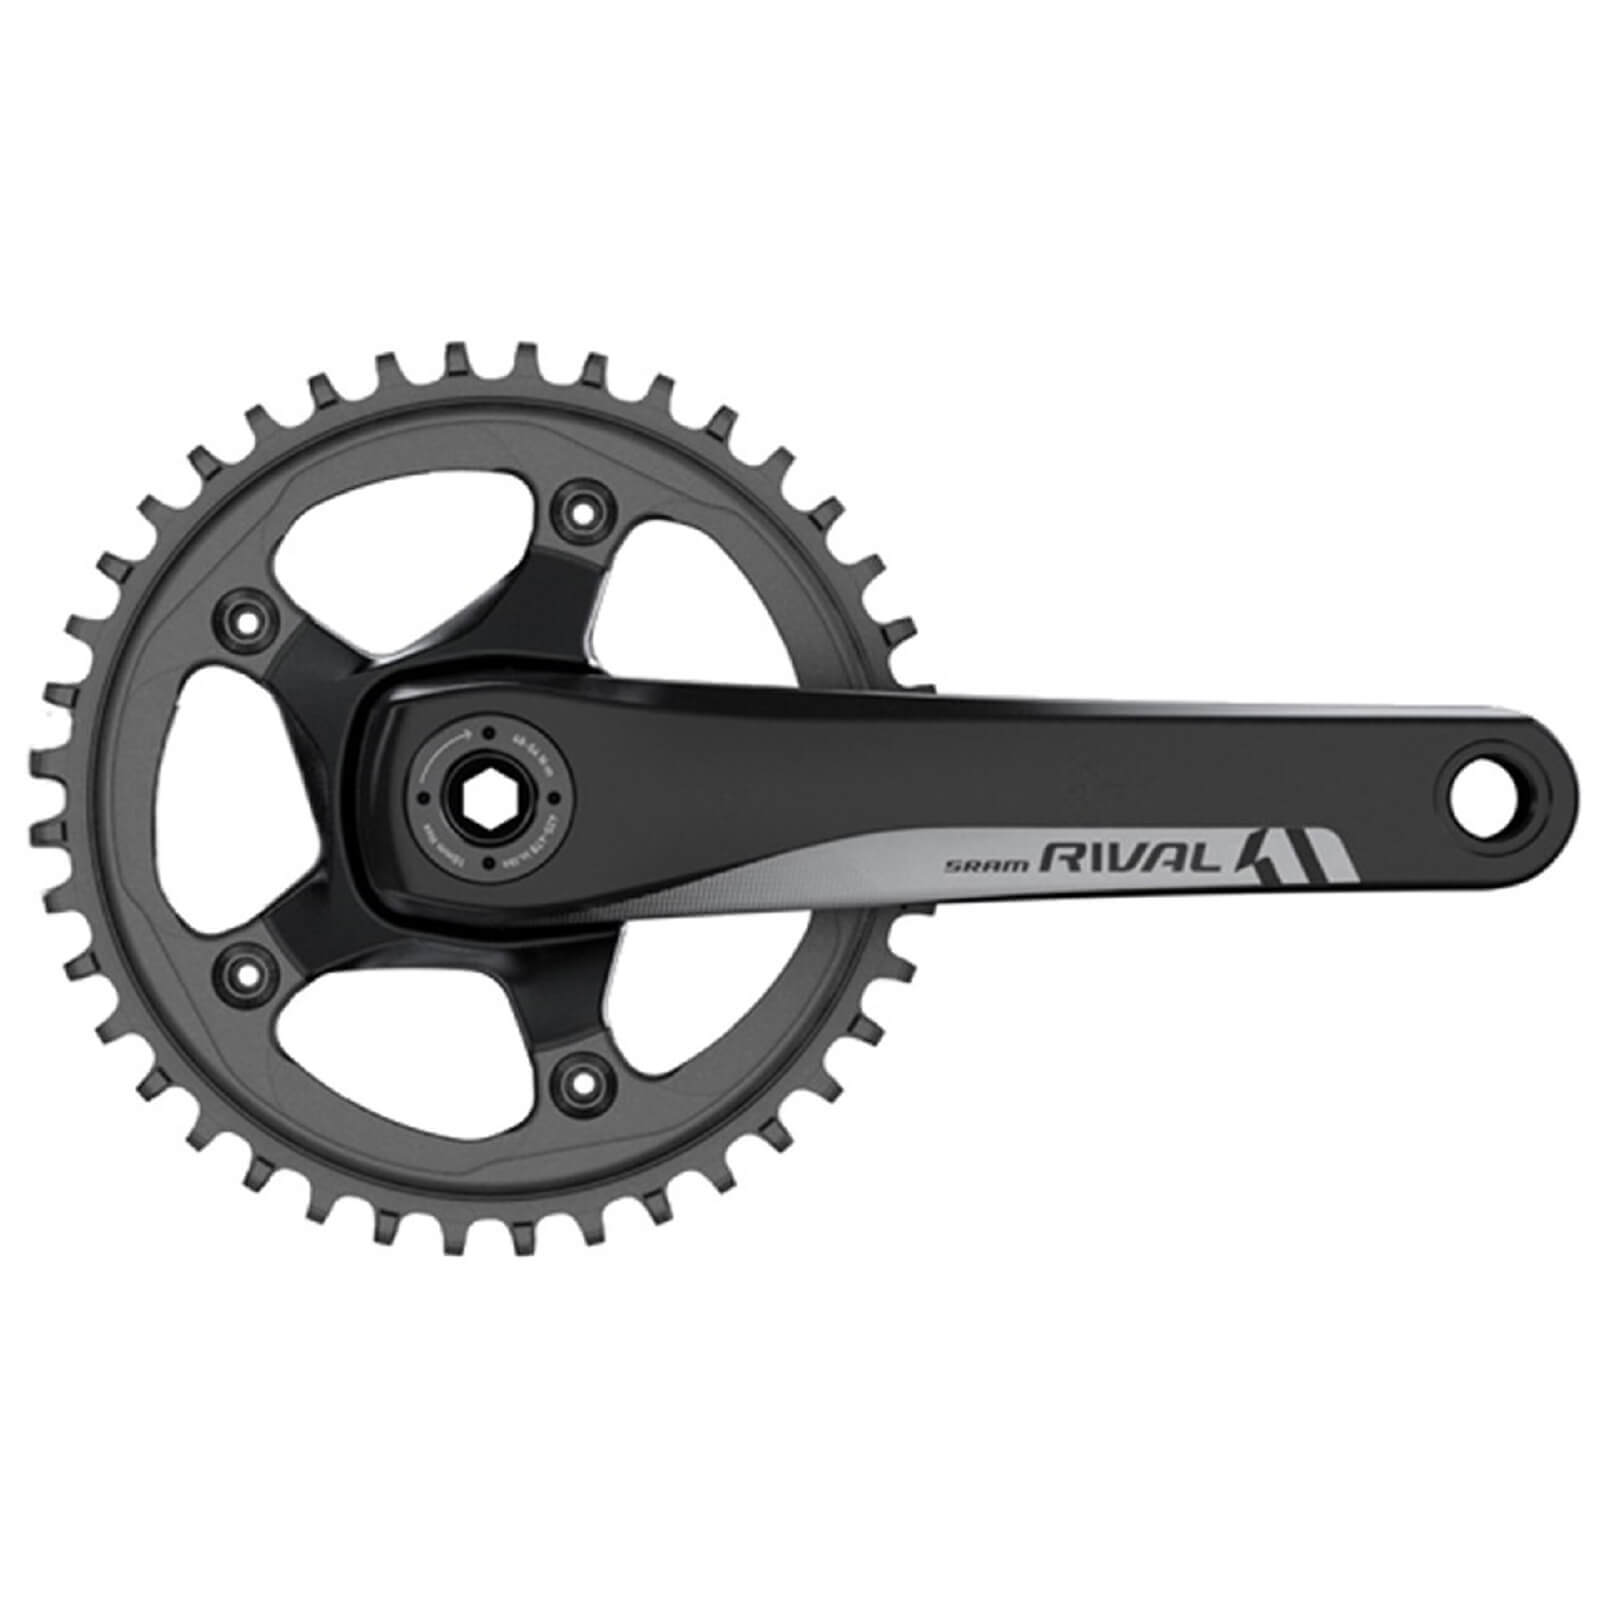 SRAM Rival1 GXP Chainset – 42T – 172.5mm